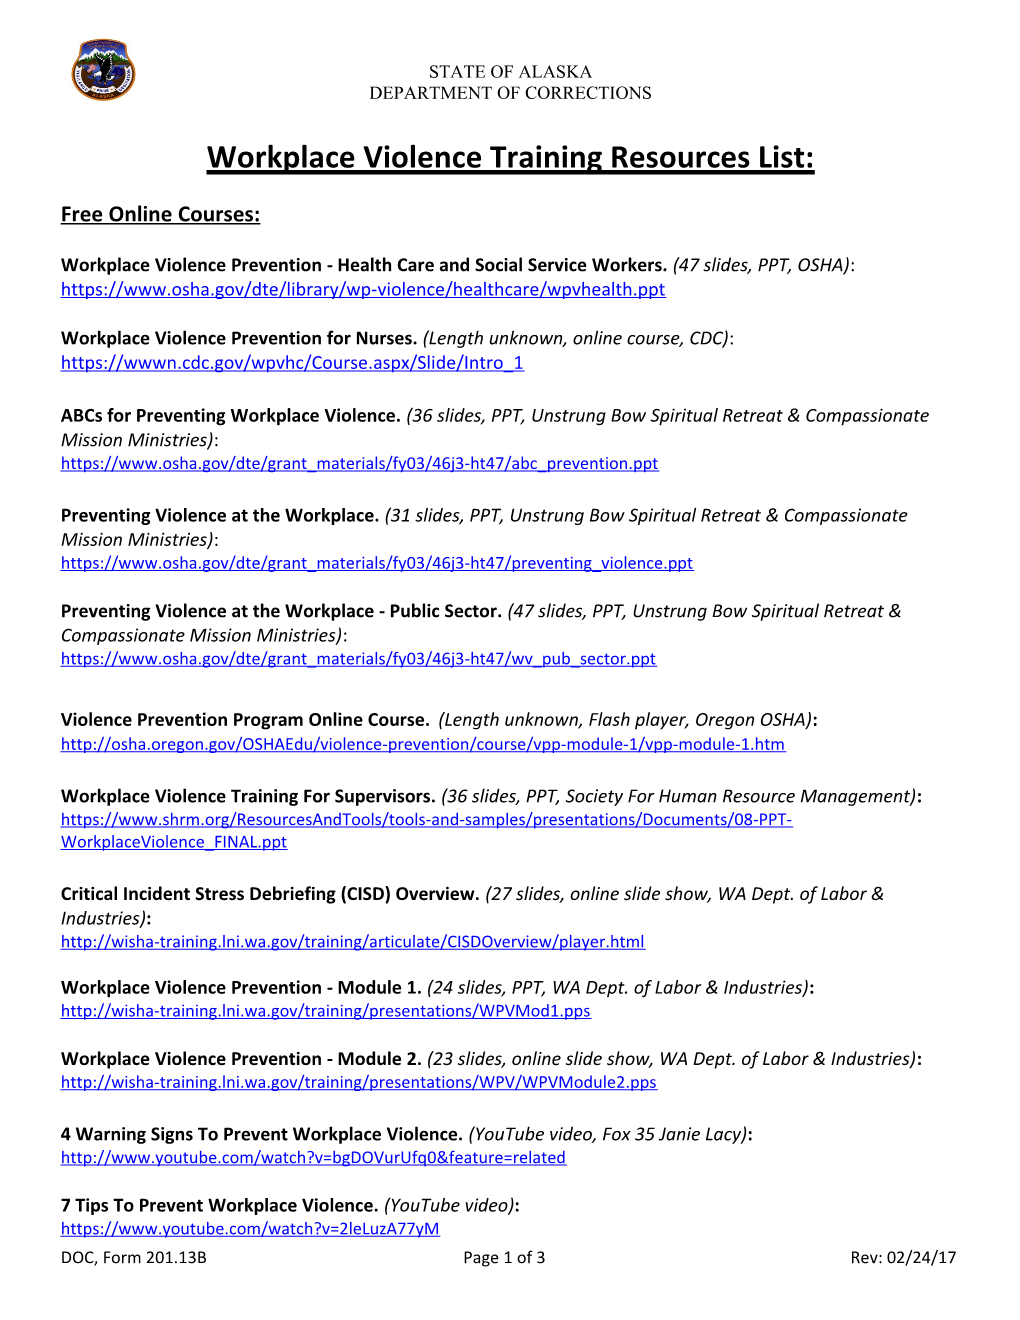 Workplace Violence Training Resources List